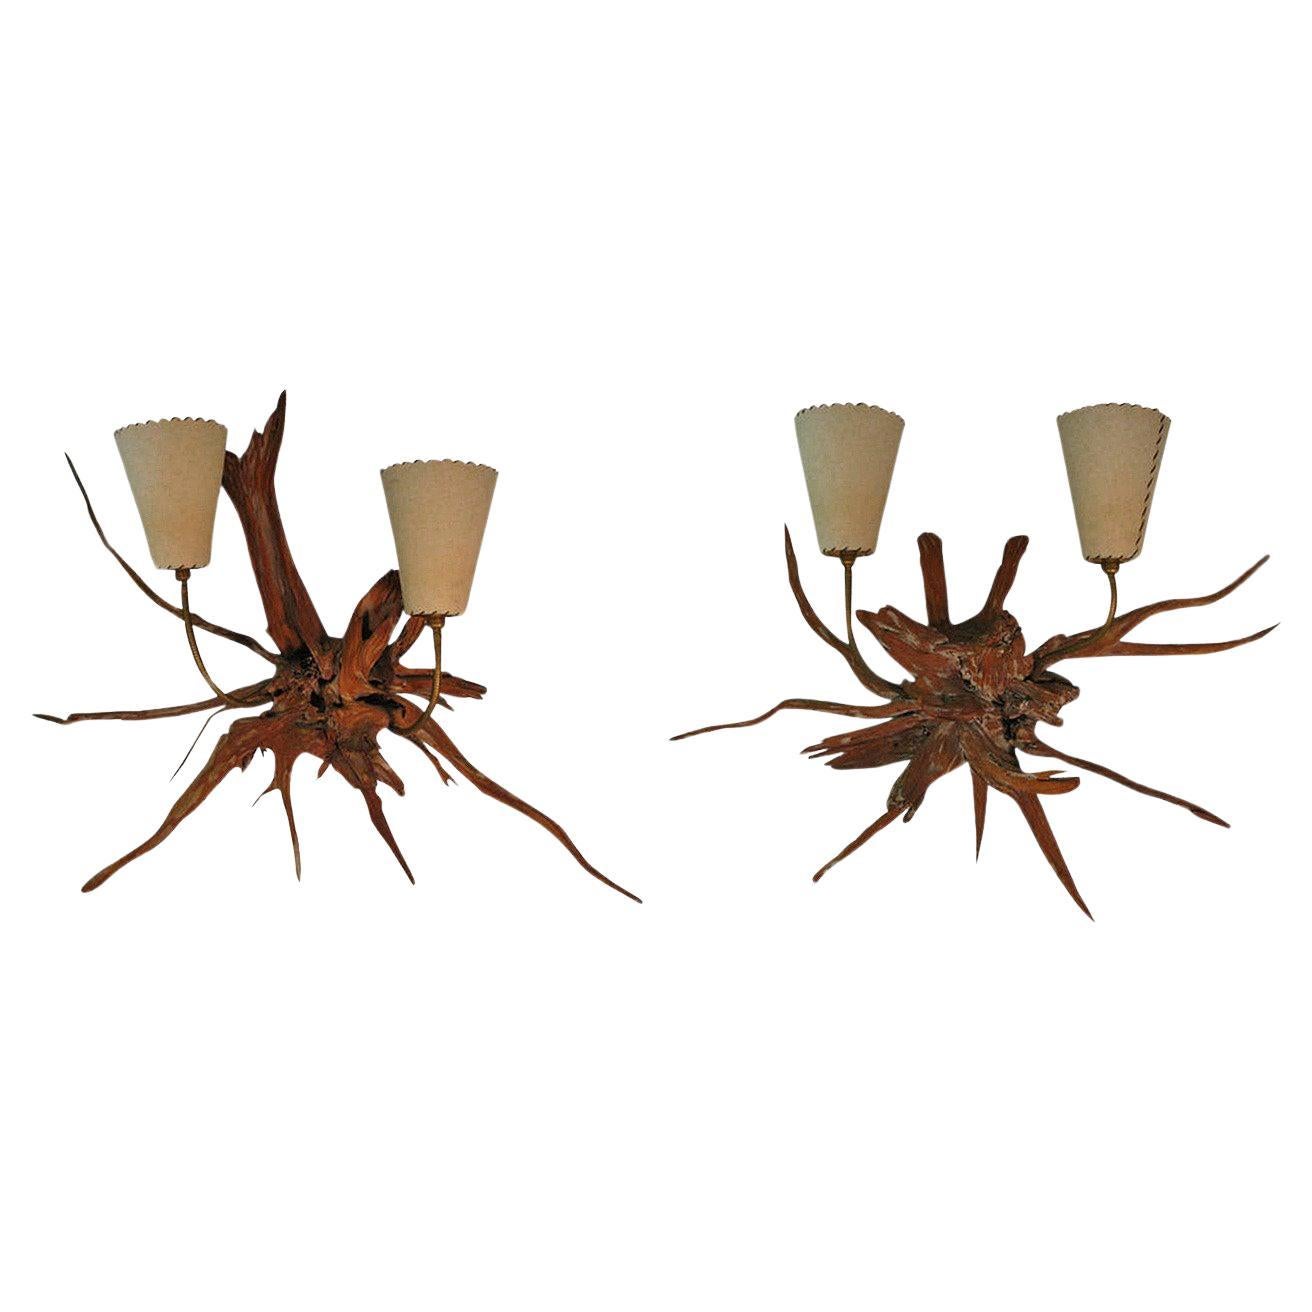  Pair of Mid-Century Modern Sun Bleached Sculptural Root Wall Sconces For Sale